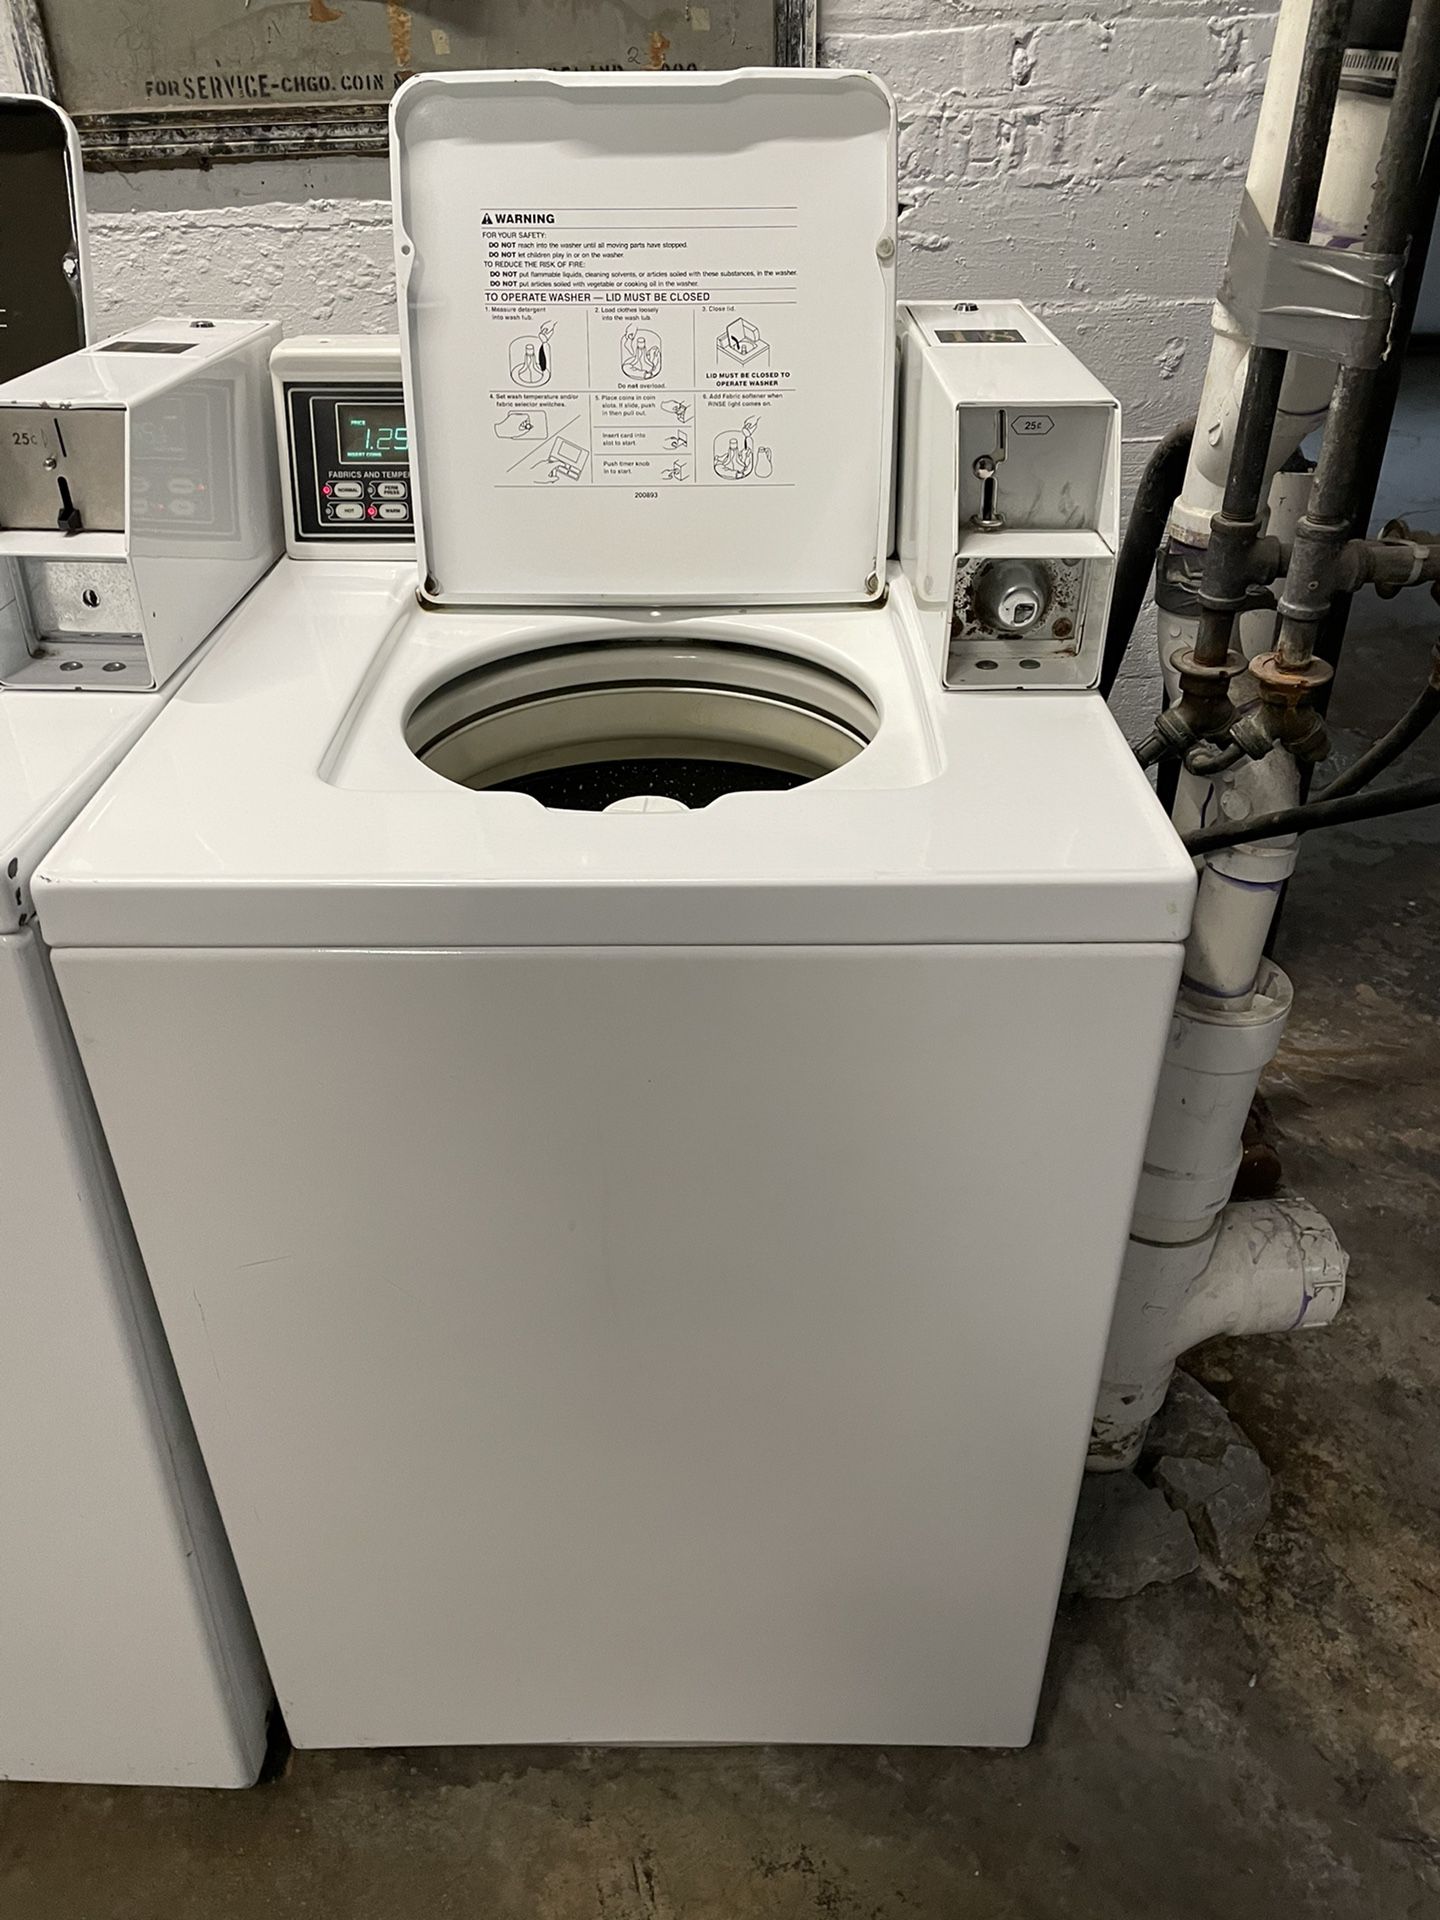 Portable Washer Machine for Sale in Chicago, IL - OfferUp